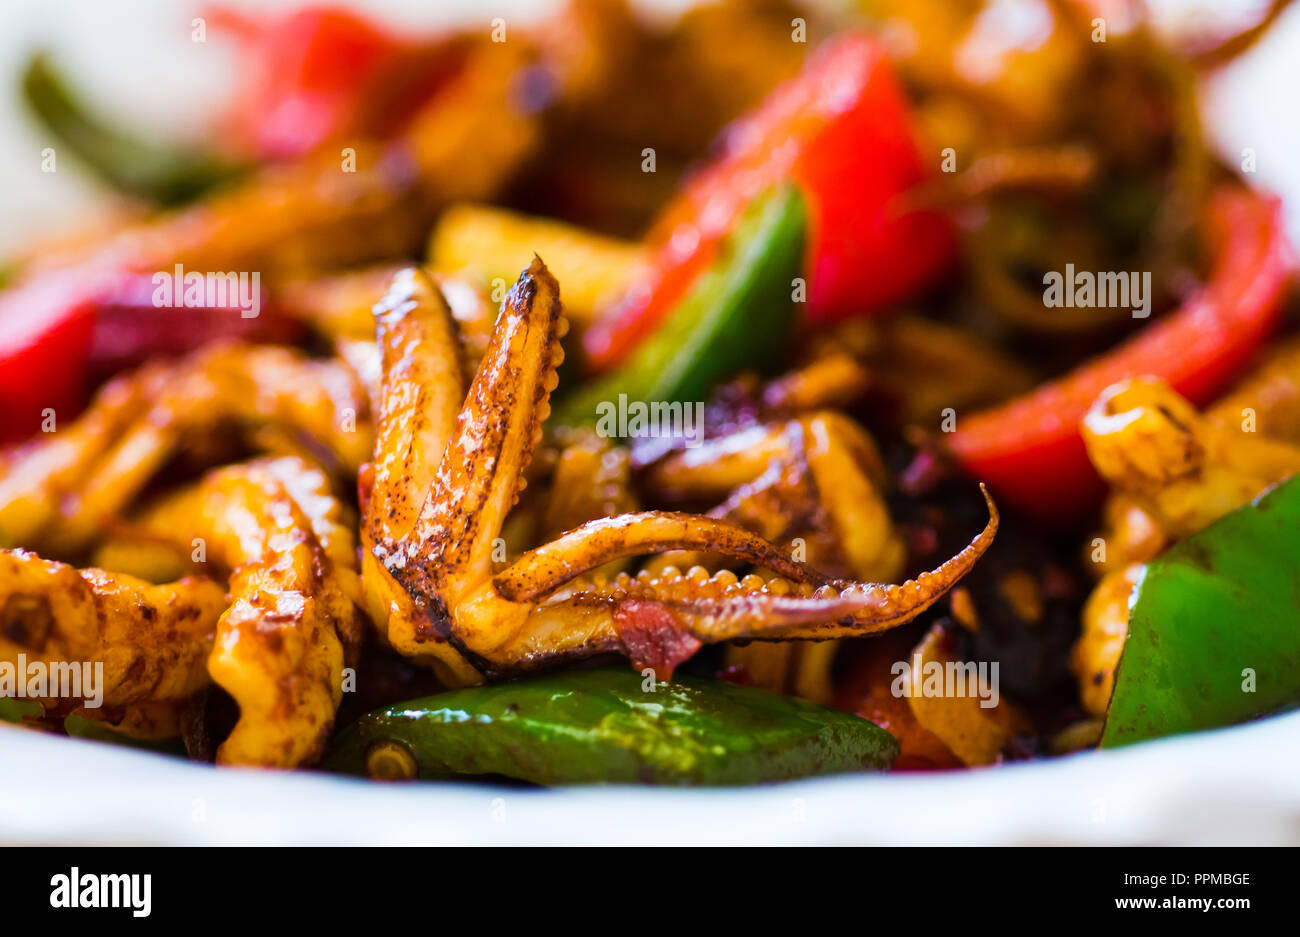 Fried squid with vegetables on a plate close up Stock Photo